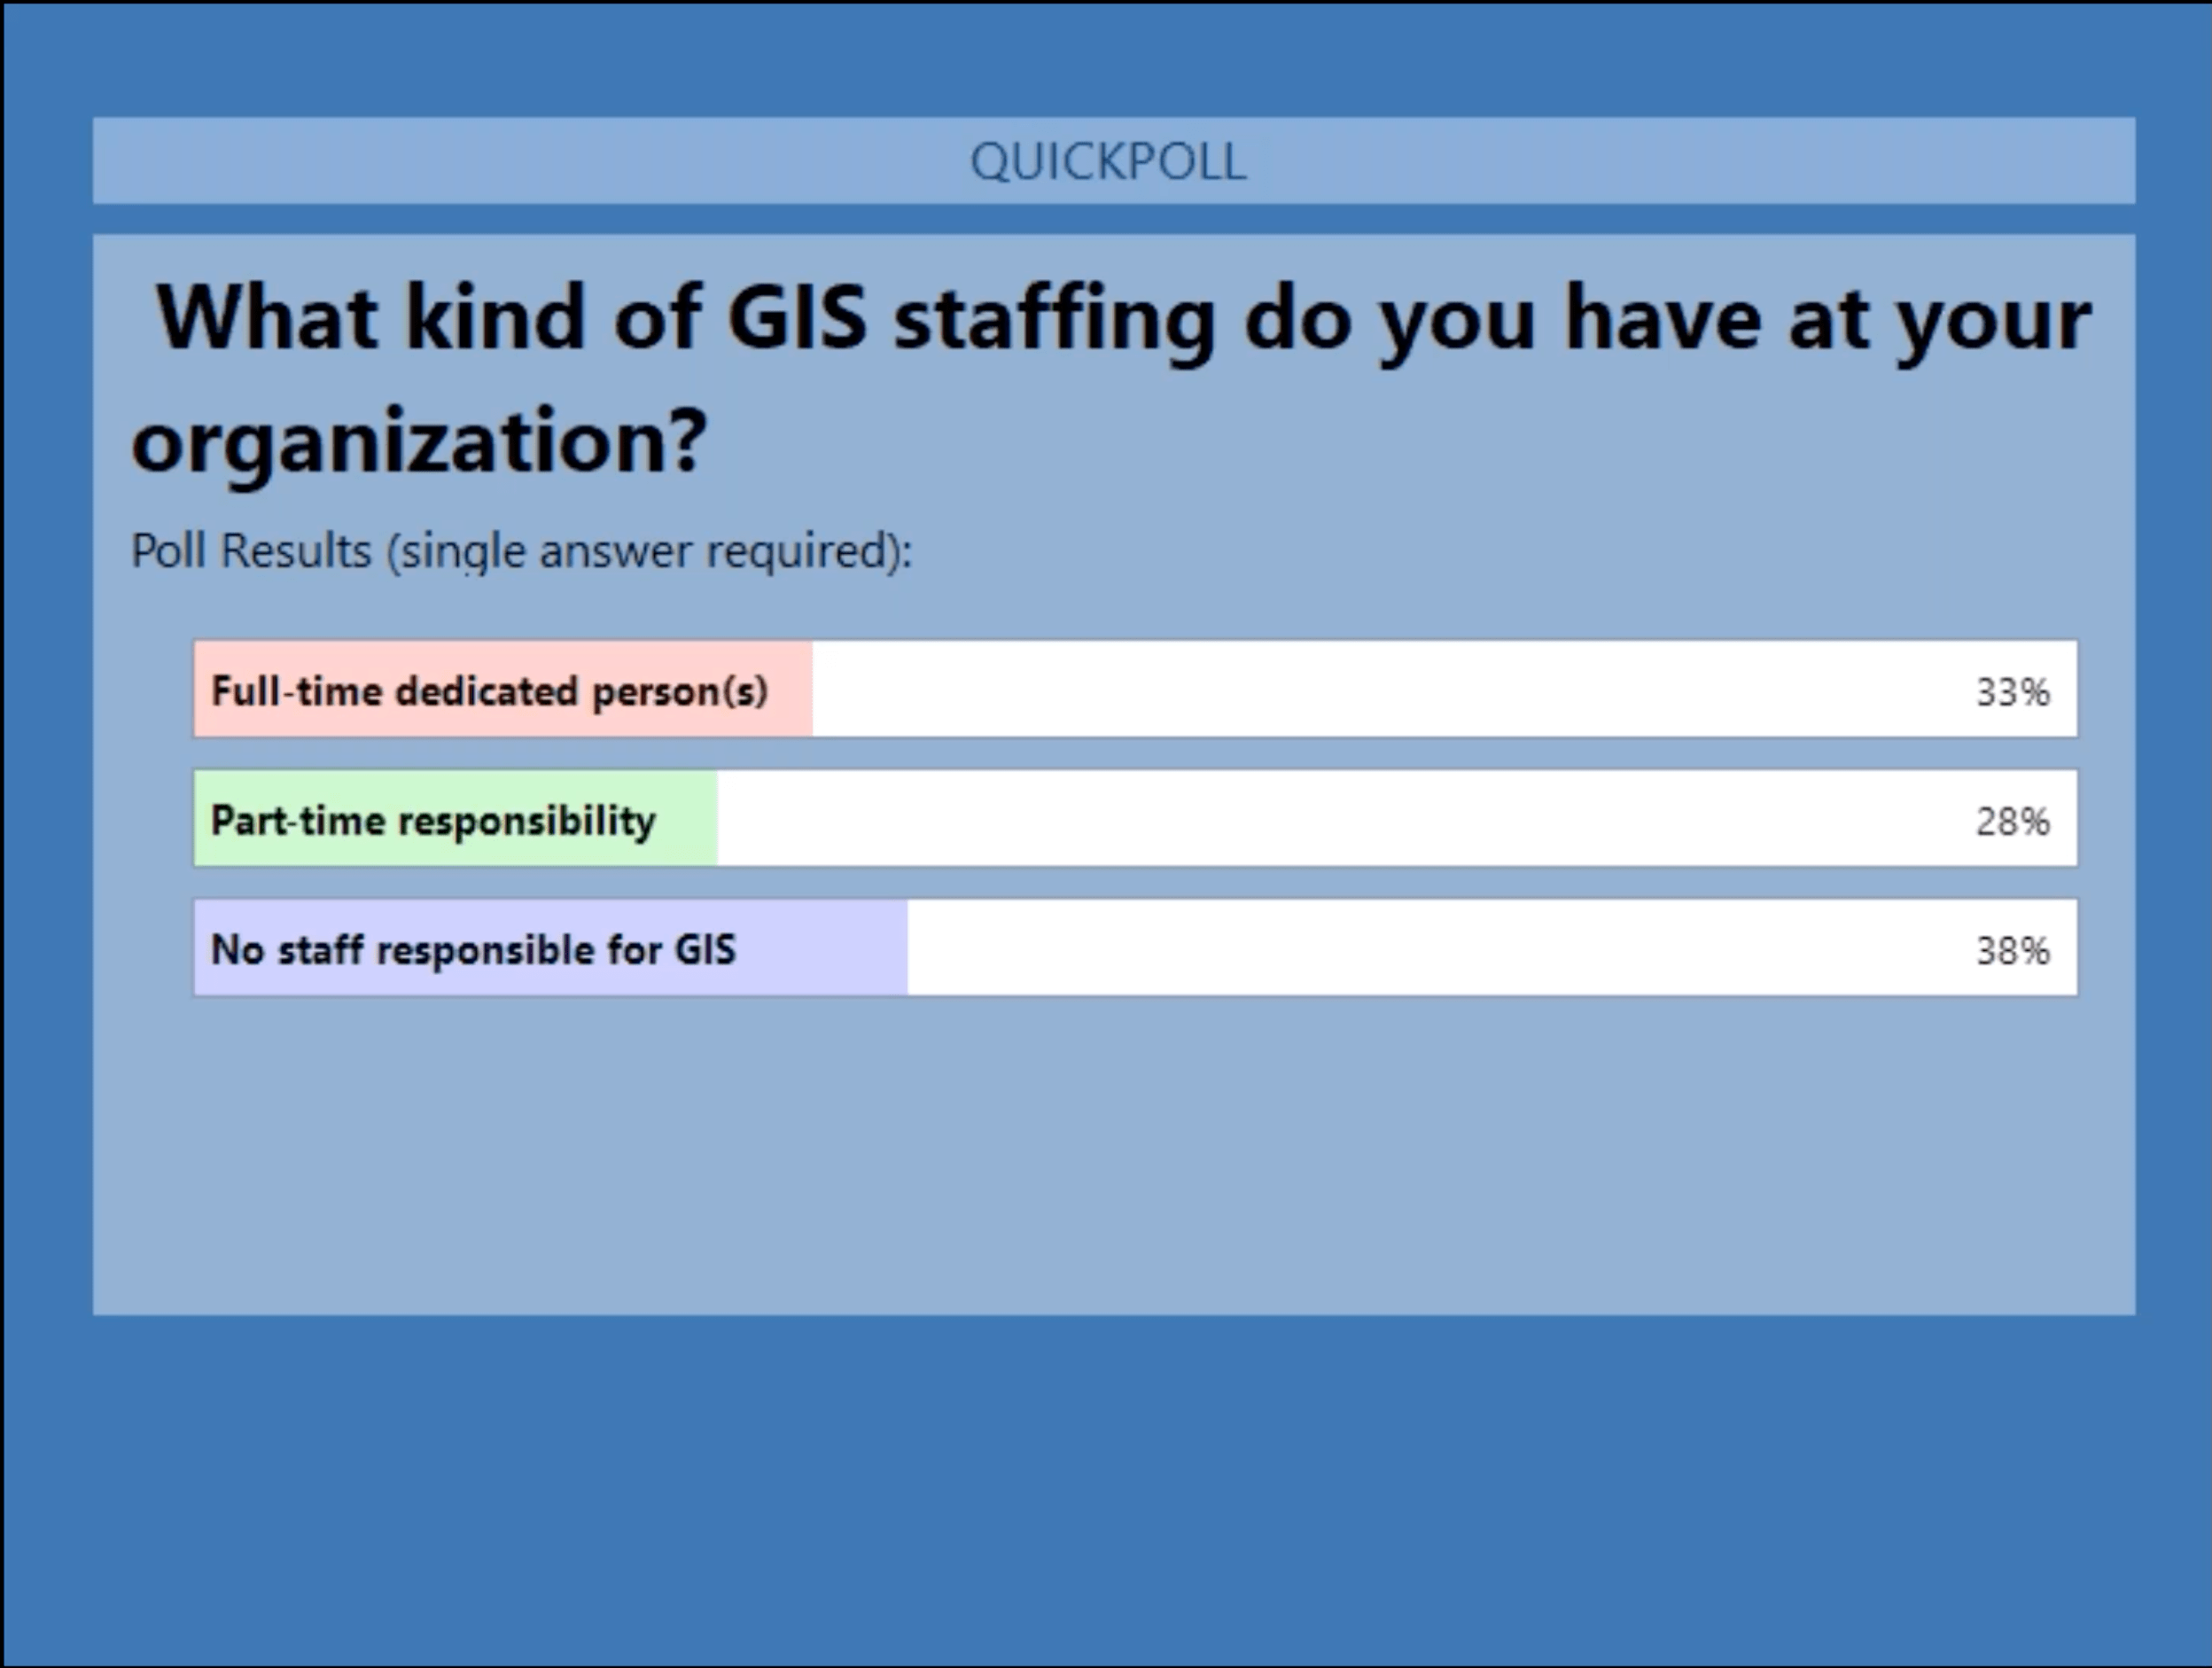 NRWA Eos Webinar Poll: "What kind of GIS Staffing do you have at your organization?"